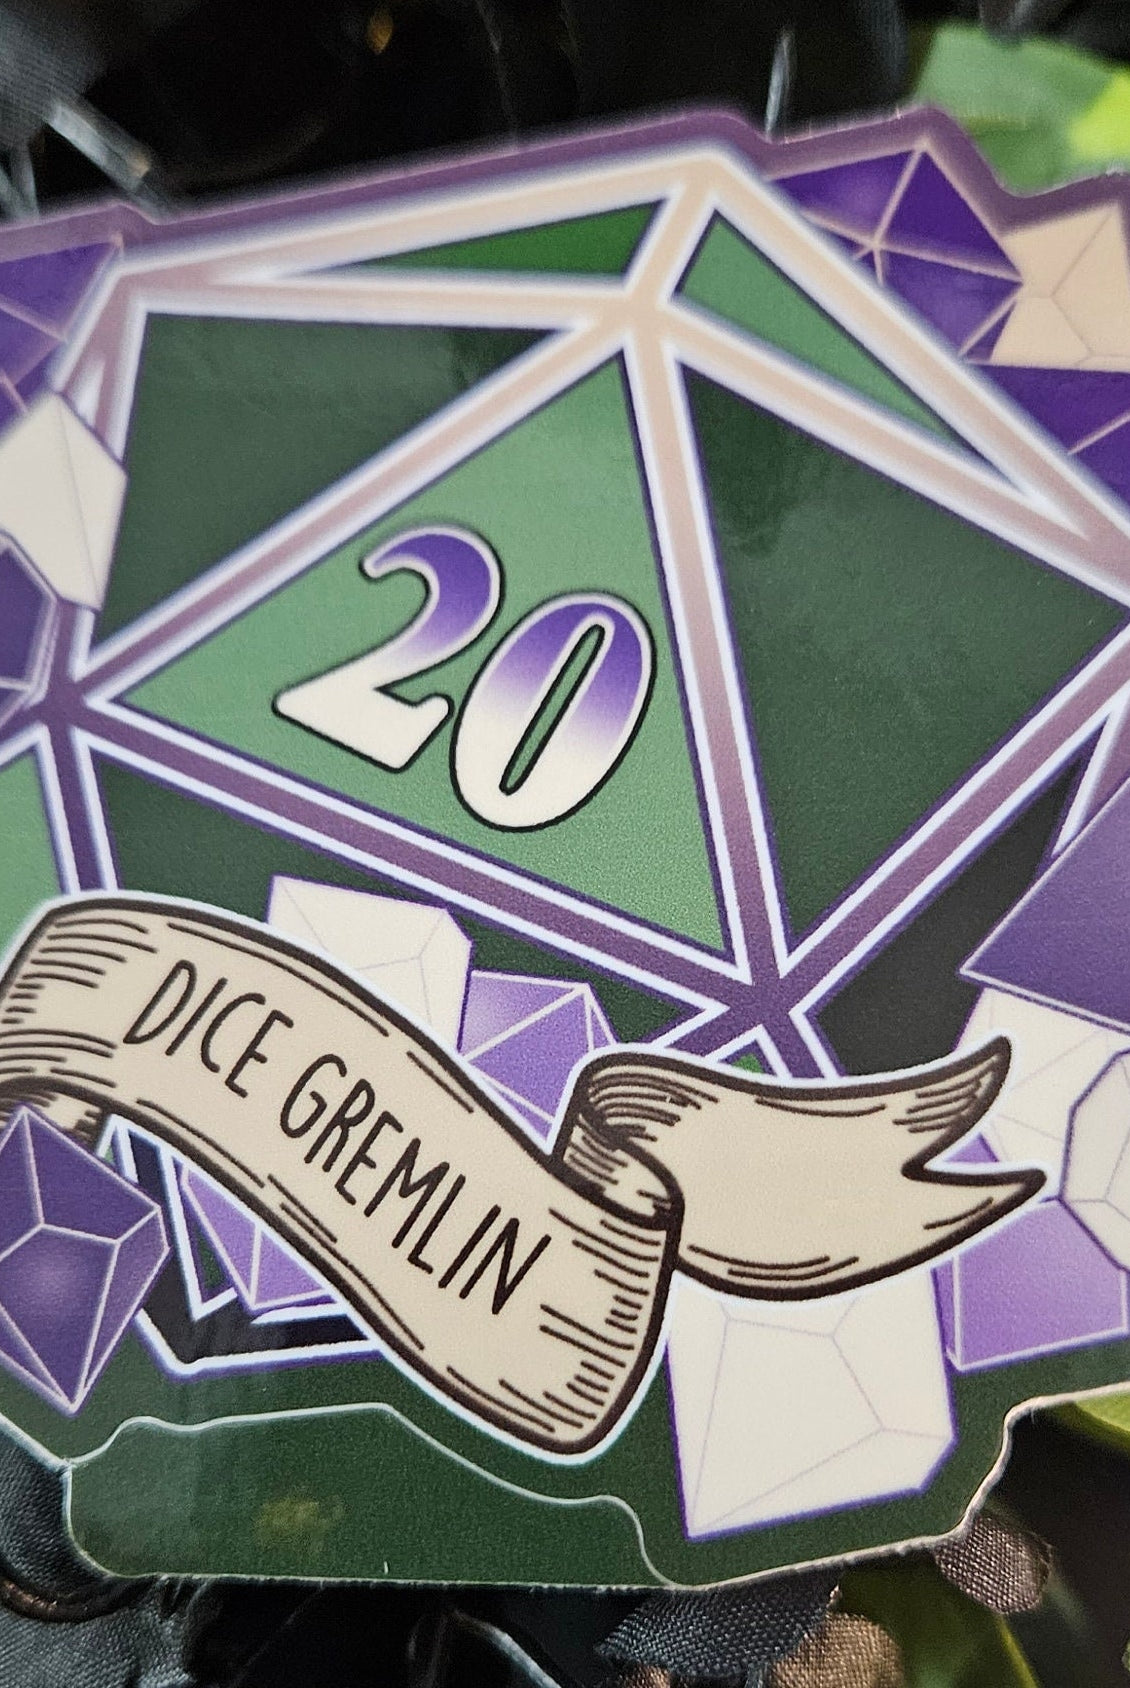 GLOSSY STICKER: D20 The Dice Gremlin , Dice Gremlin D20 Sticker , D20 Stickers, D20 Sticker , D20 Dice Gremlin Sticker , Player Type D20